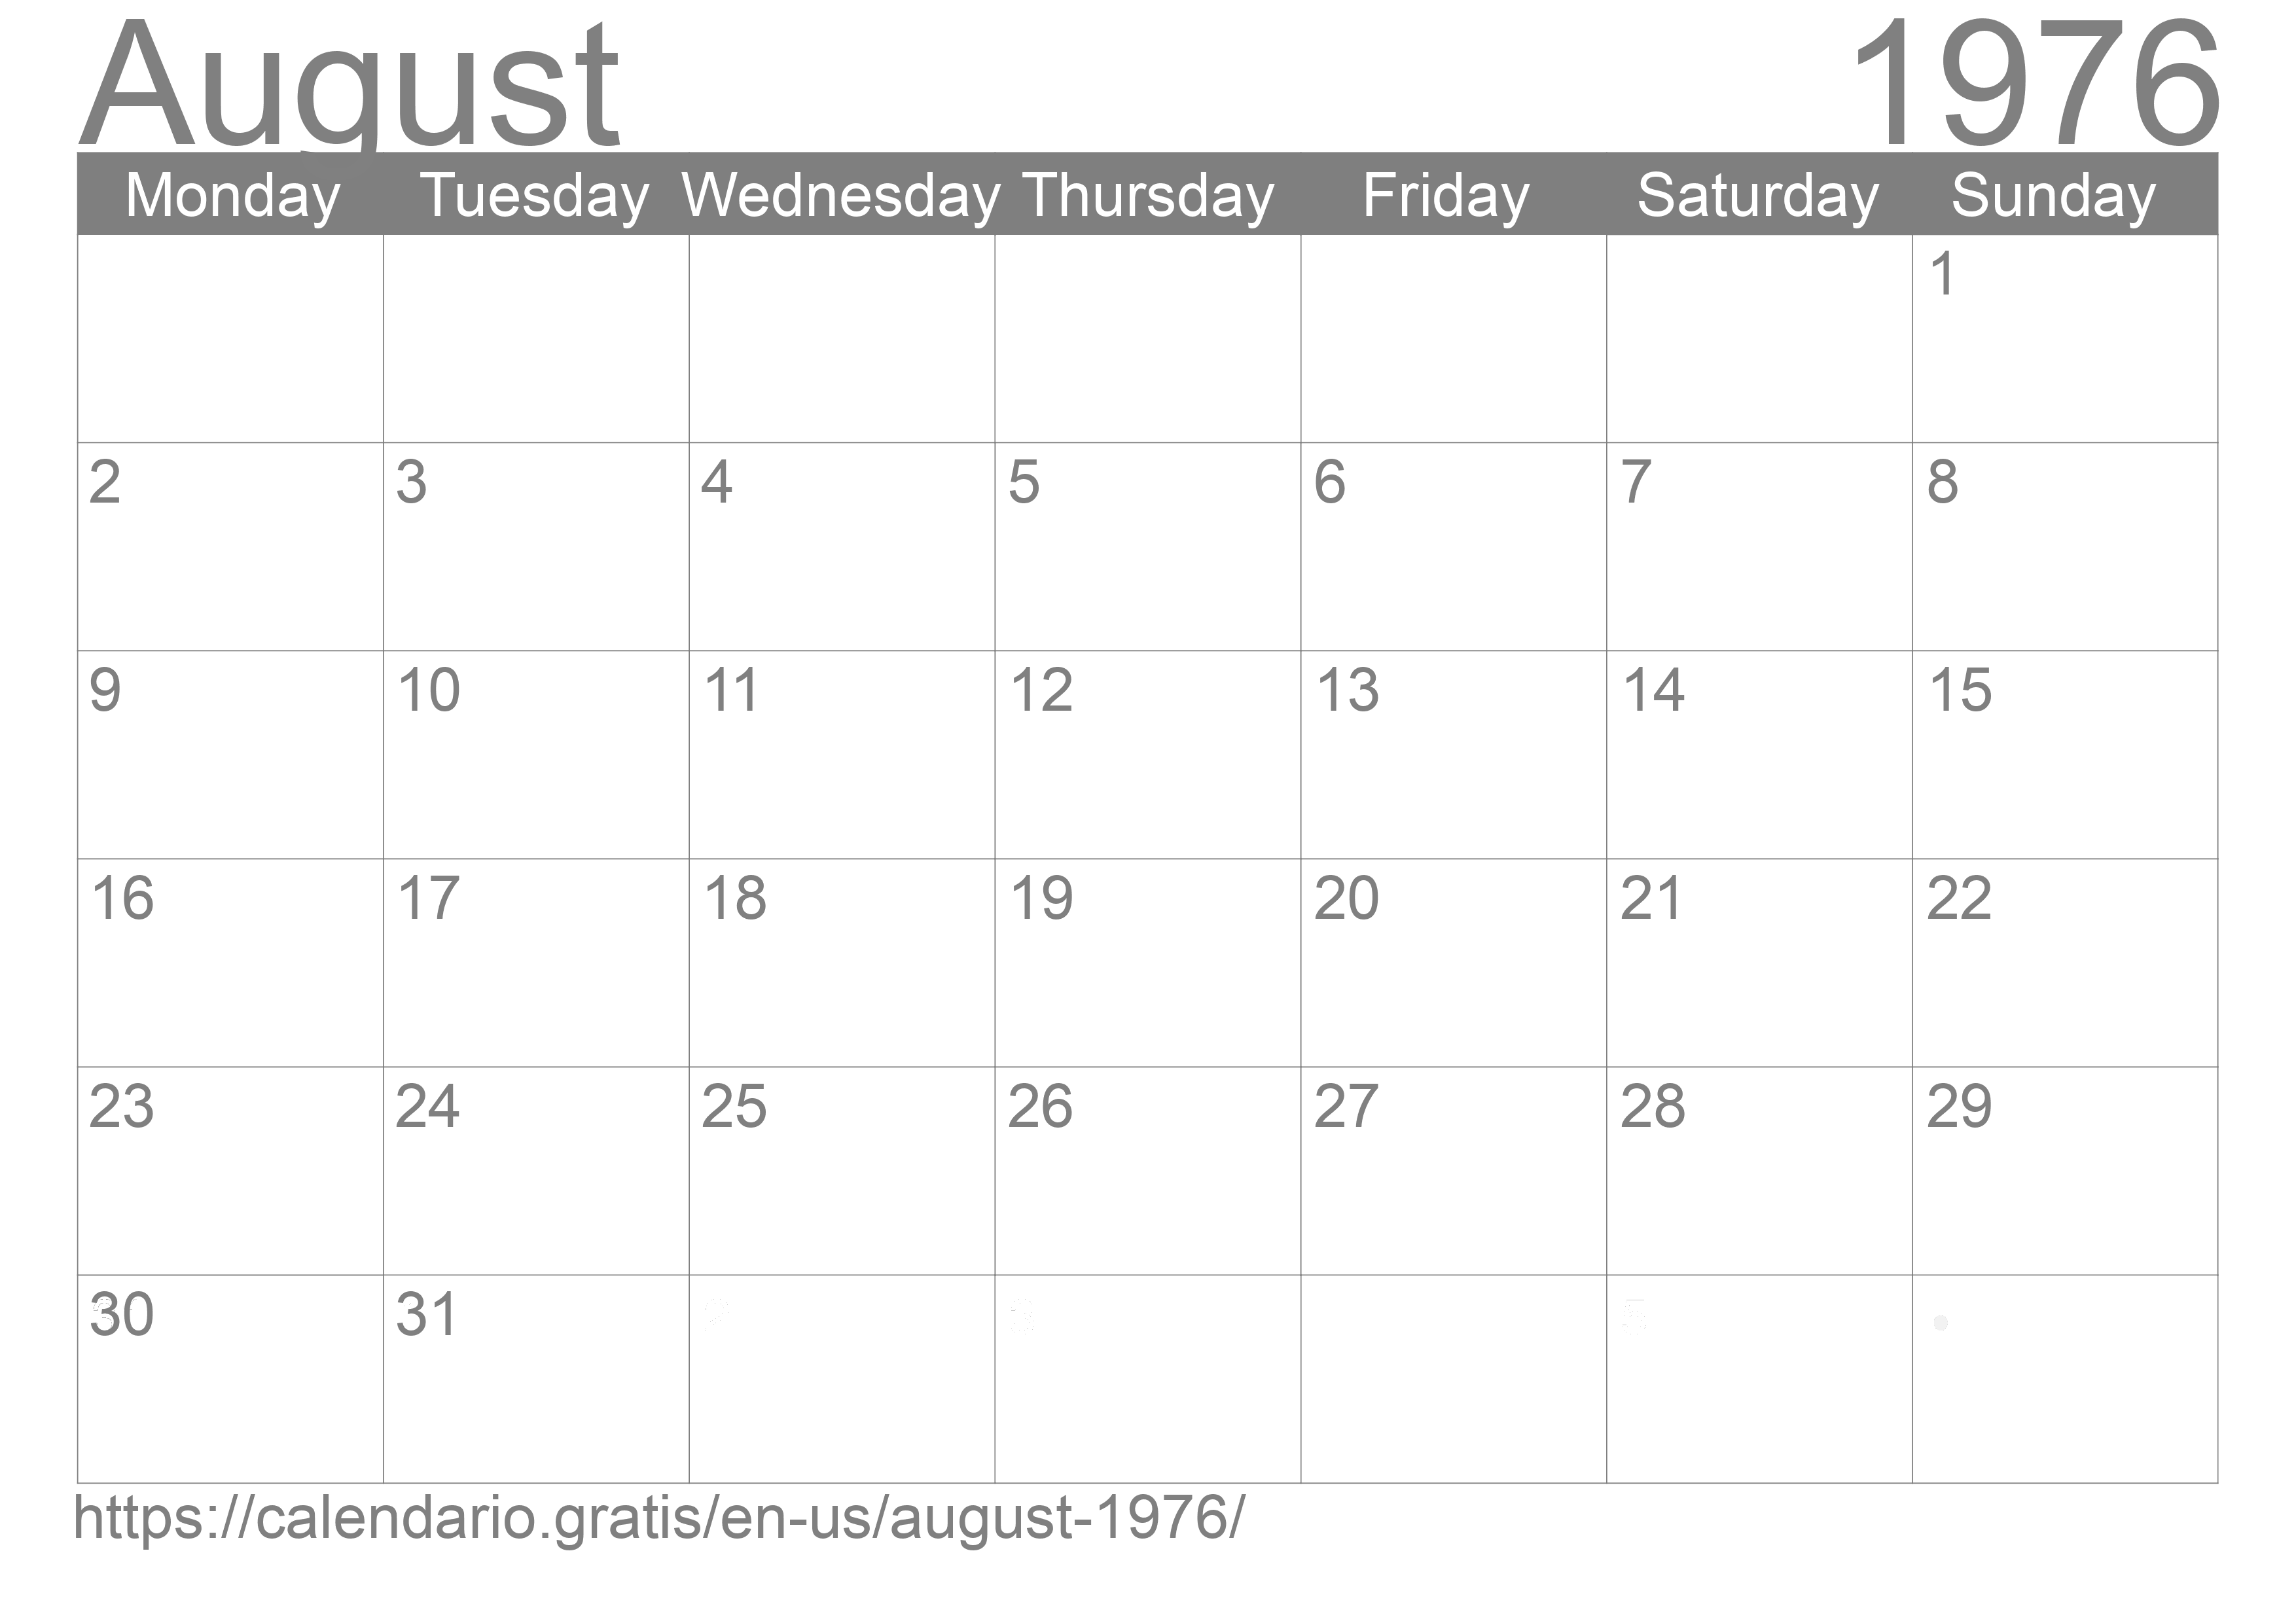 Calendar August 1976 from United States of America in English ☑️